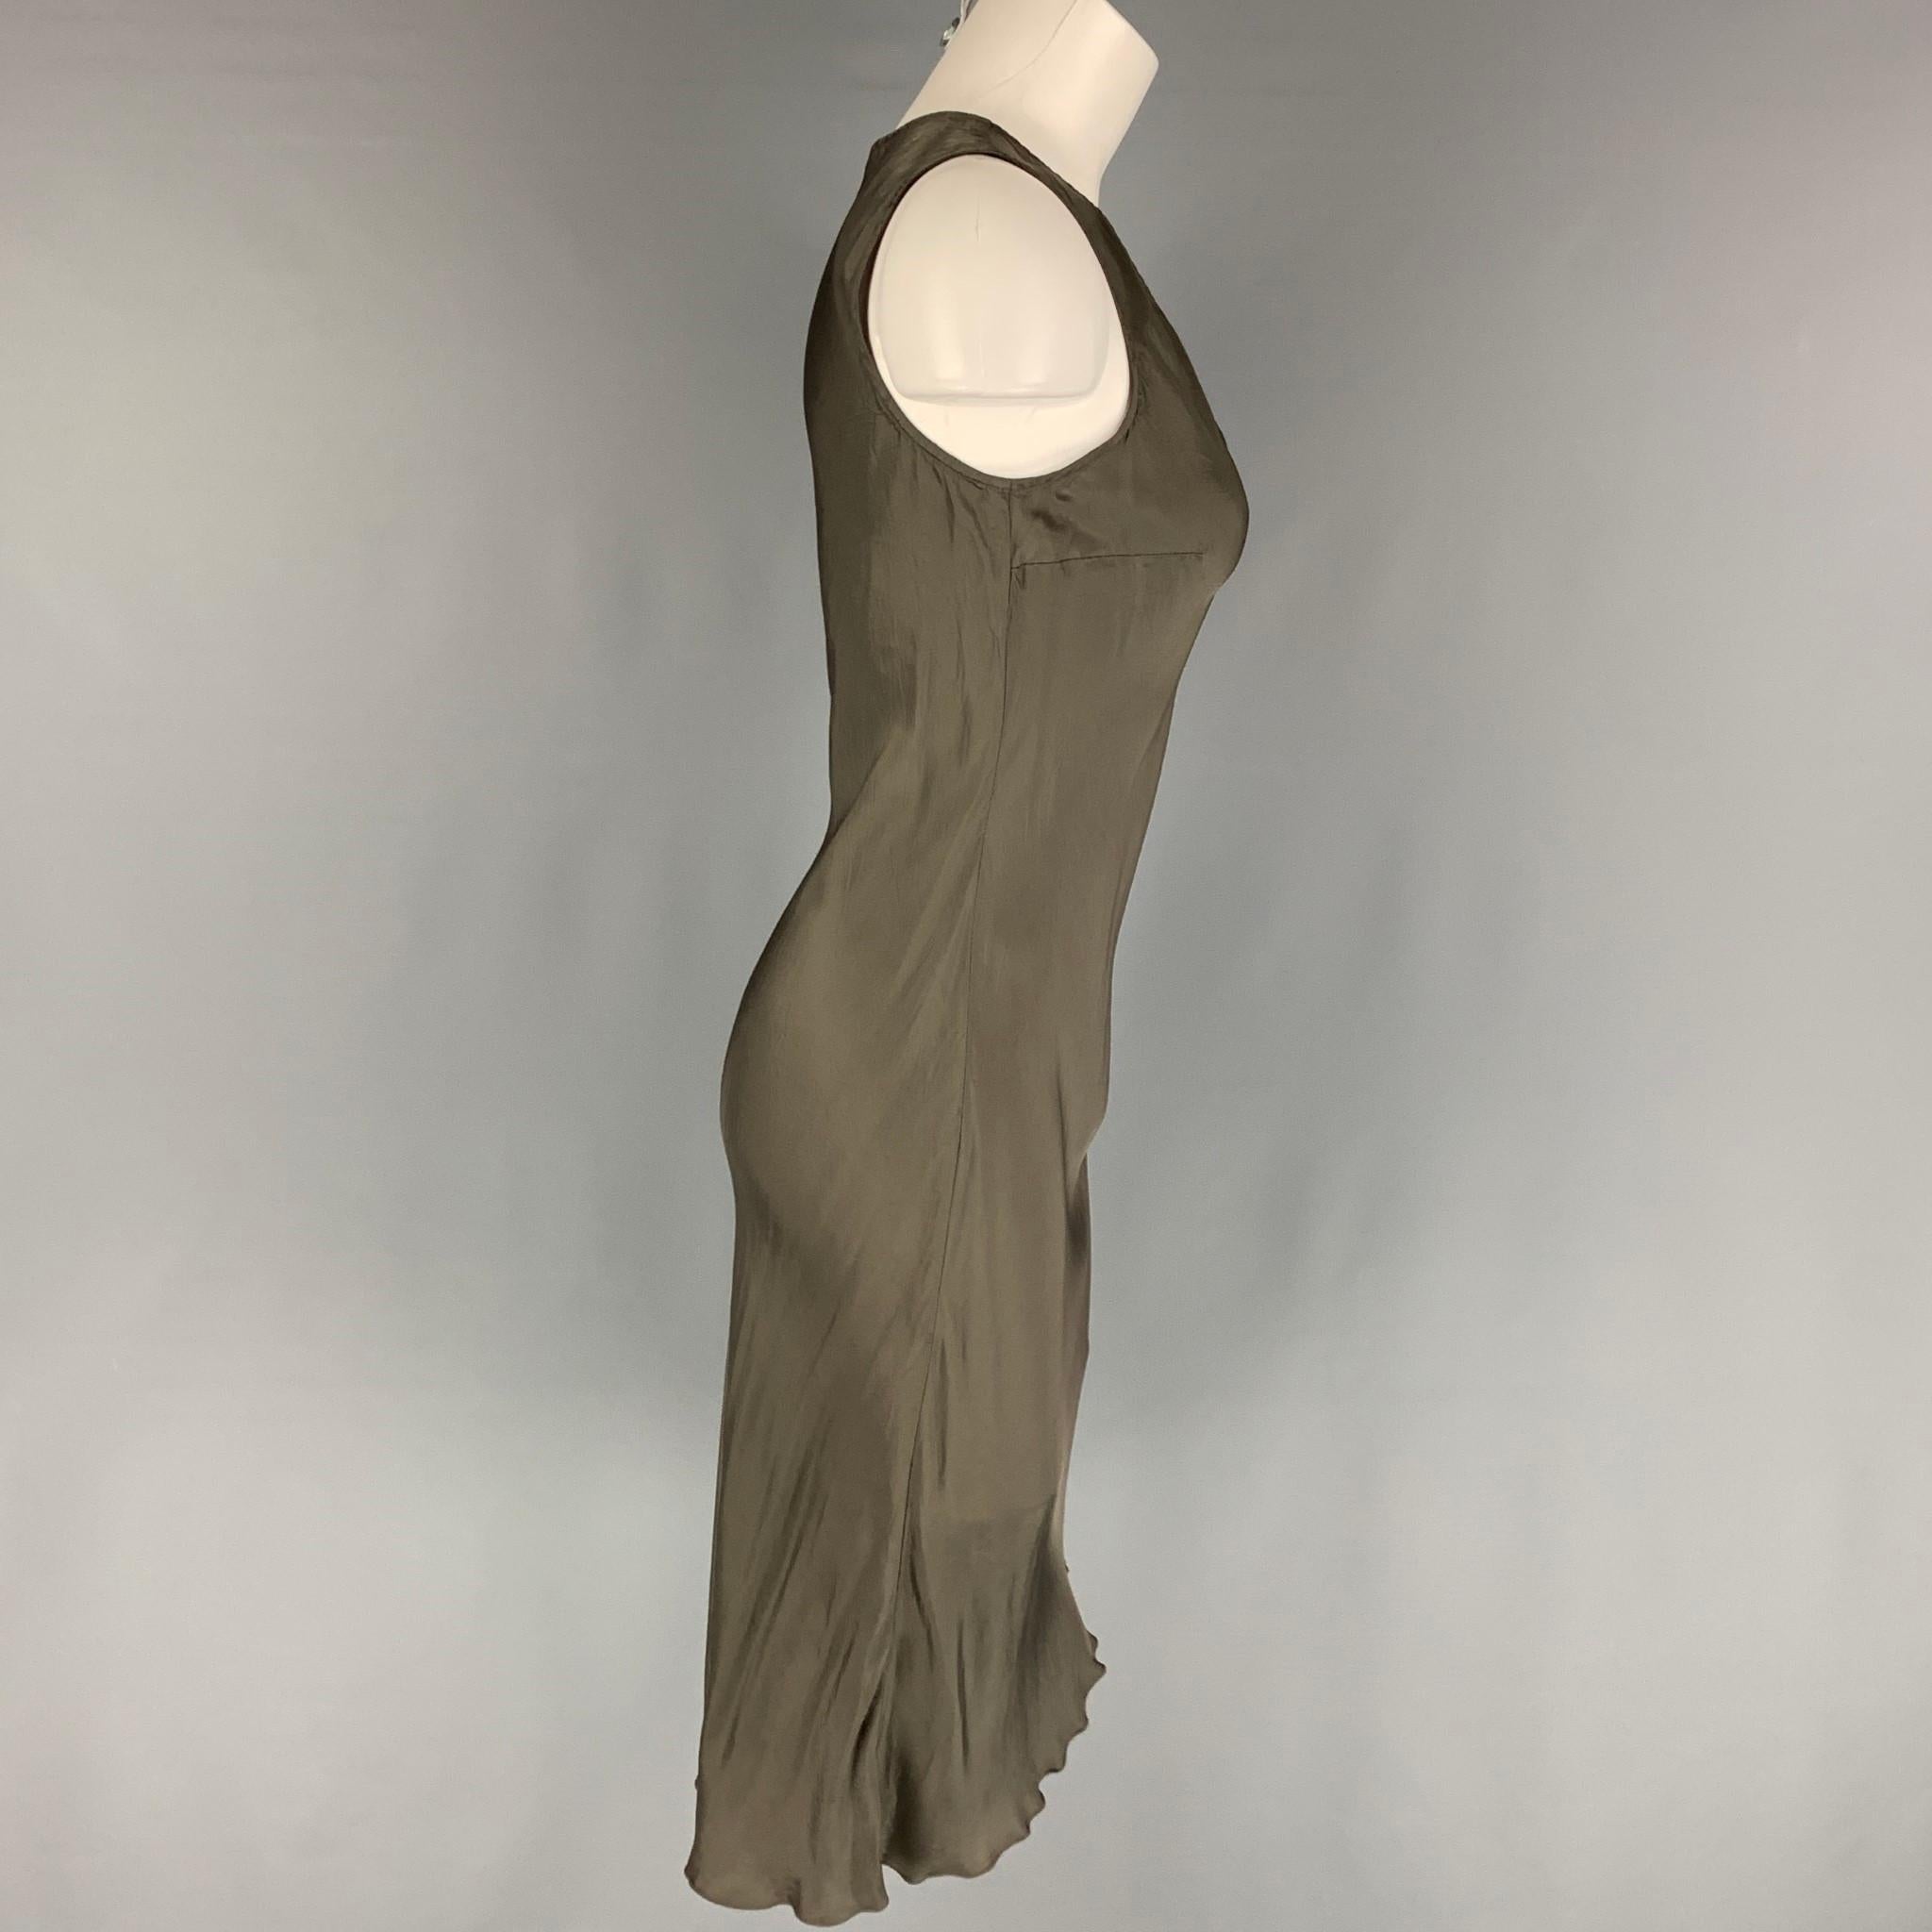 DRIES VAN NOTEN slip dress comes in a grey material featuring a v-neck. 

Very Good Pre-Owned Condition. Fabric tag removed.
Marked: 36

Measurements:

Shoulder: 12 in.
Bust: 26 in.
Waist: 26 in.
Hip: 30 in.
Length: 45 in. 